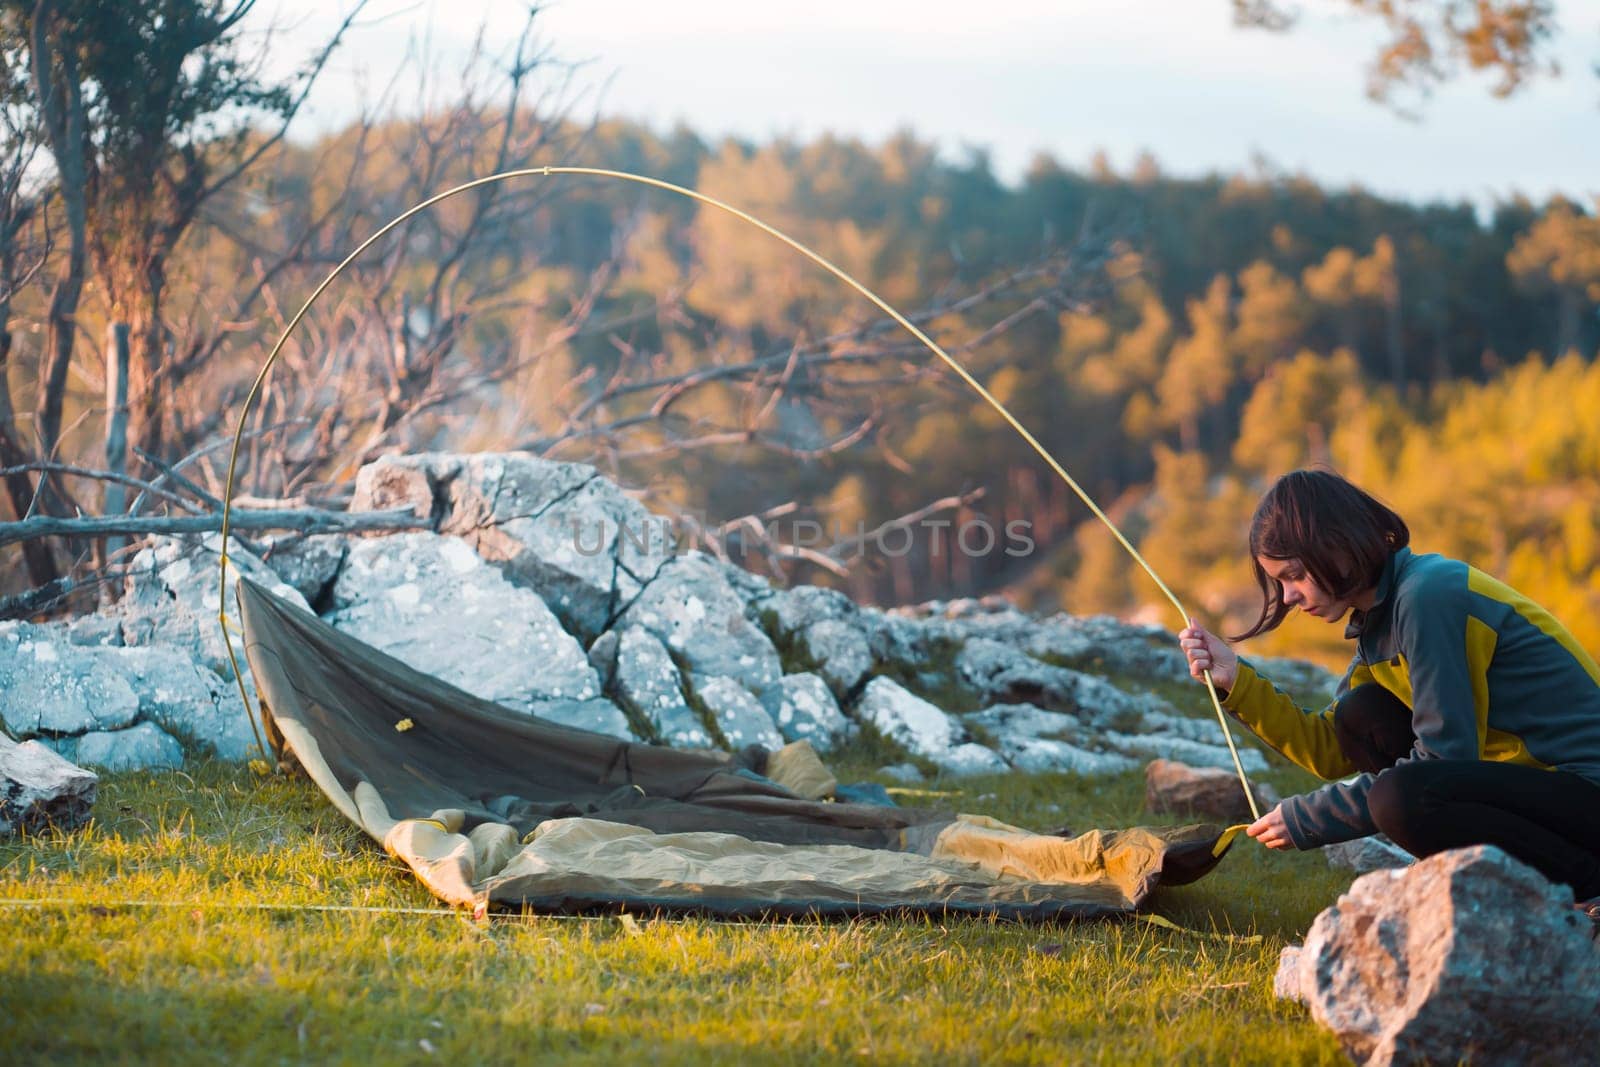 A young girl sets up her tent at a campsite on a green meadow among the mountains on a warm summer evening. The traveler is getting ready for a comfortable sleep in nature.